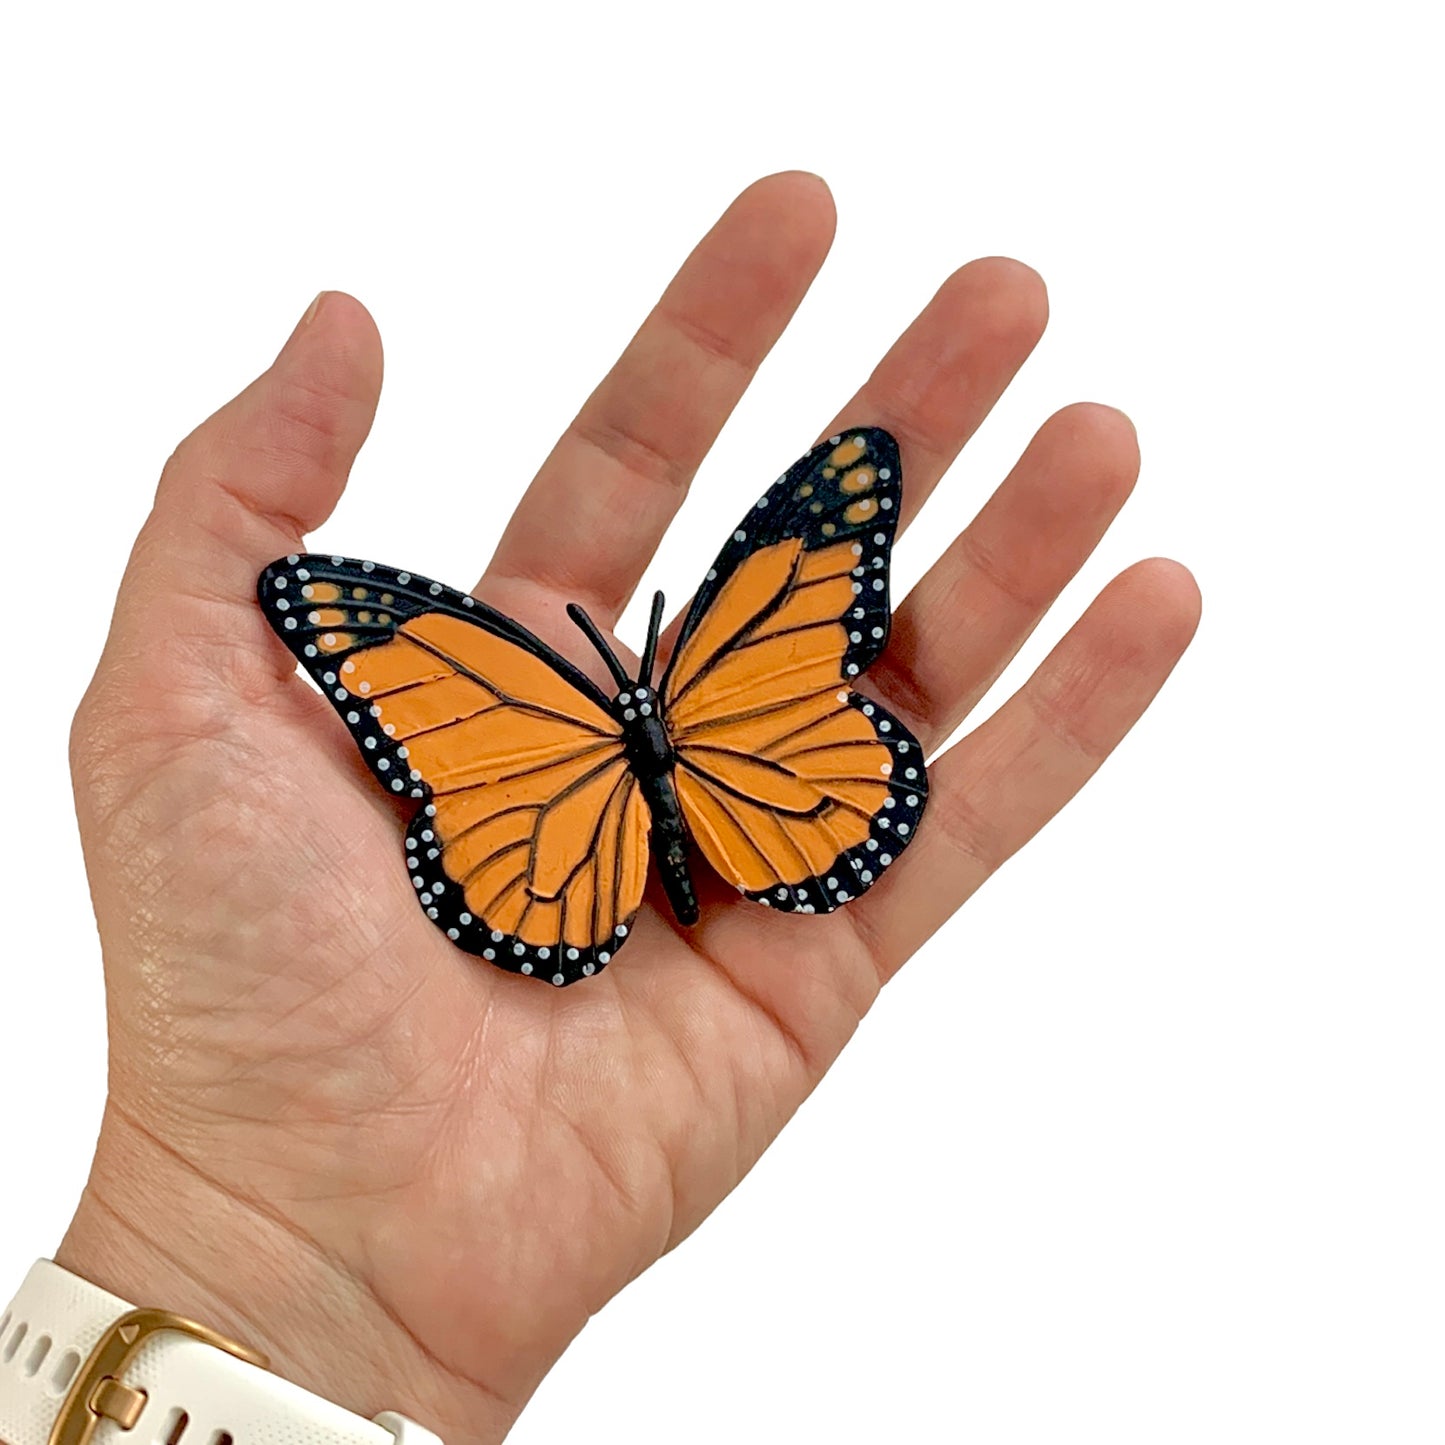 Butterfly Life Cycle (with 3D models)